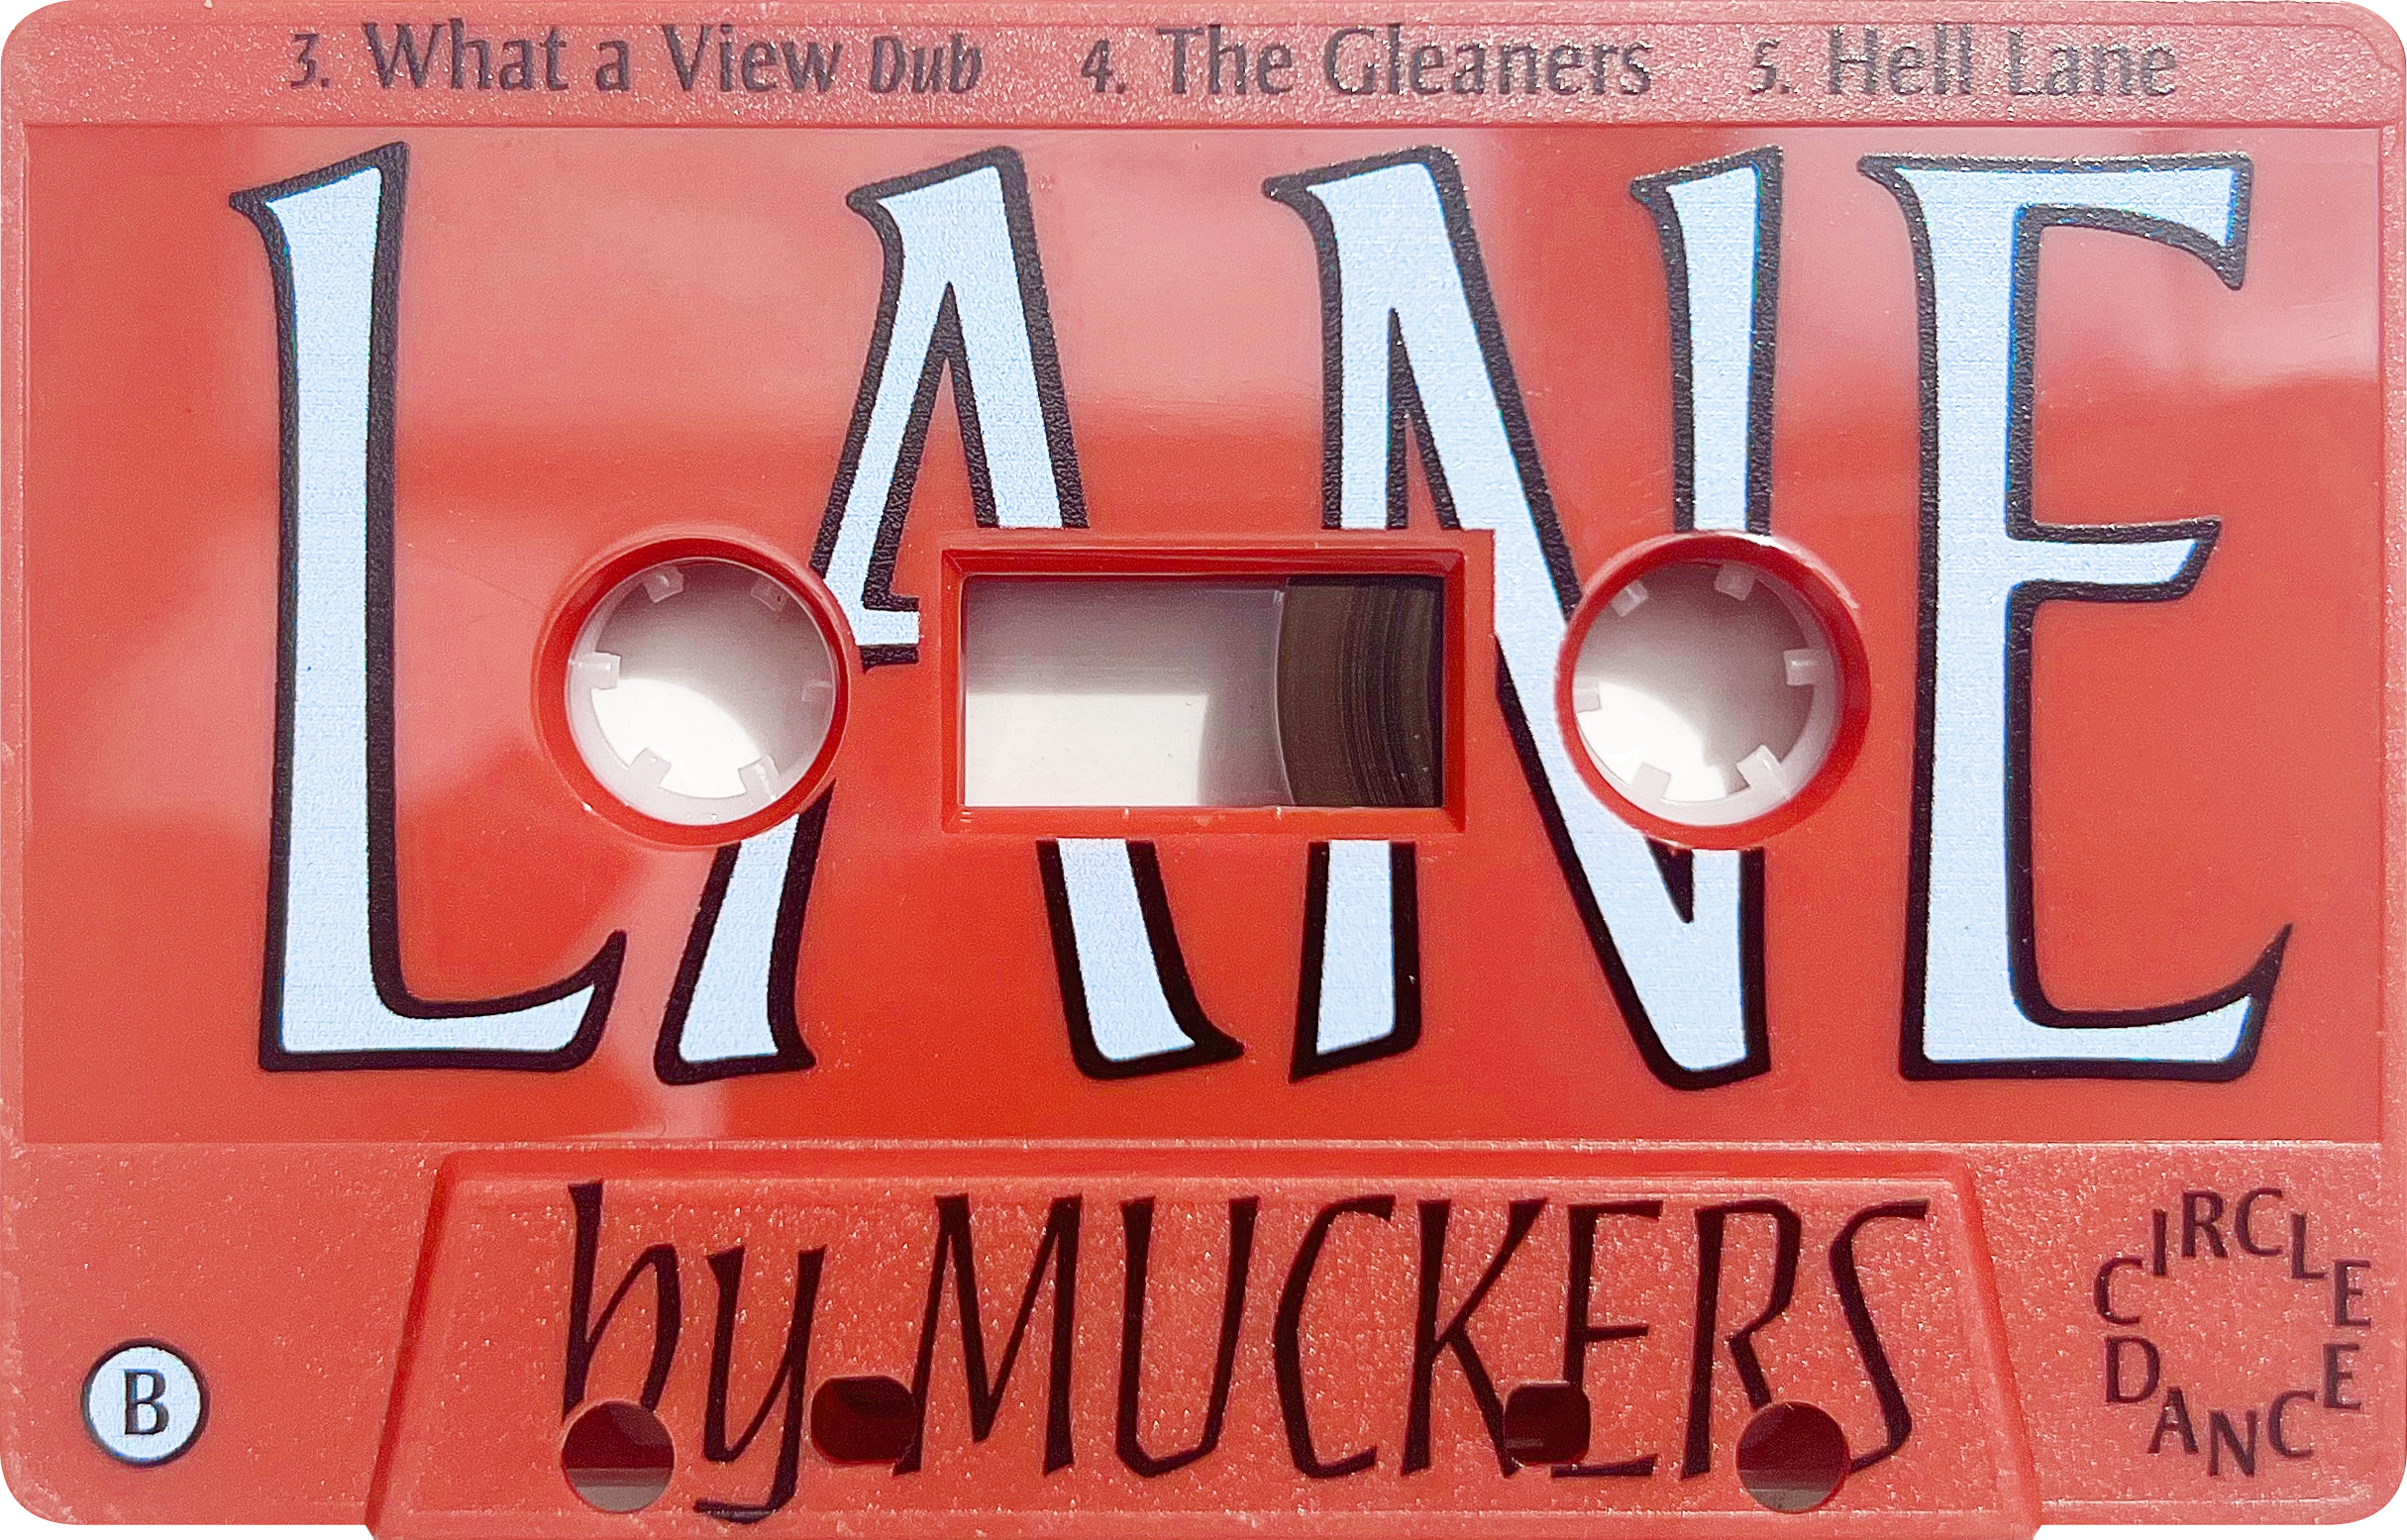 Rear Cover of Muckers, Out of County, vinyl release